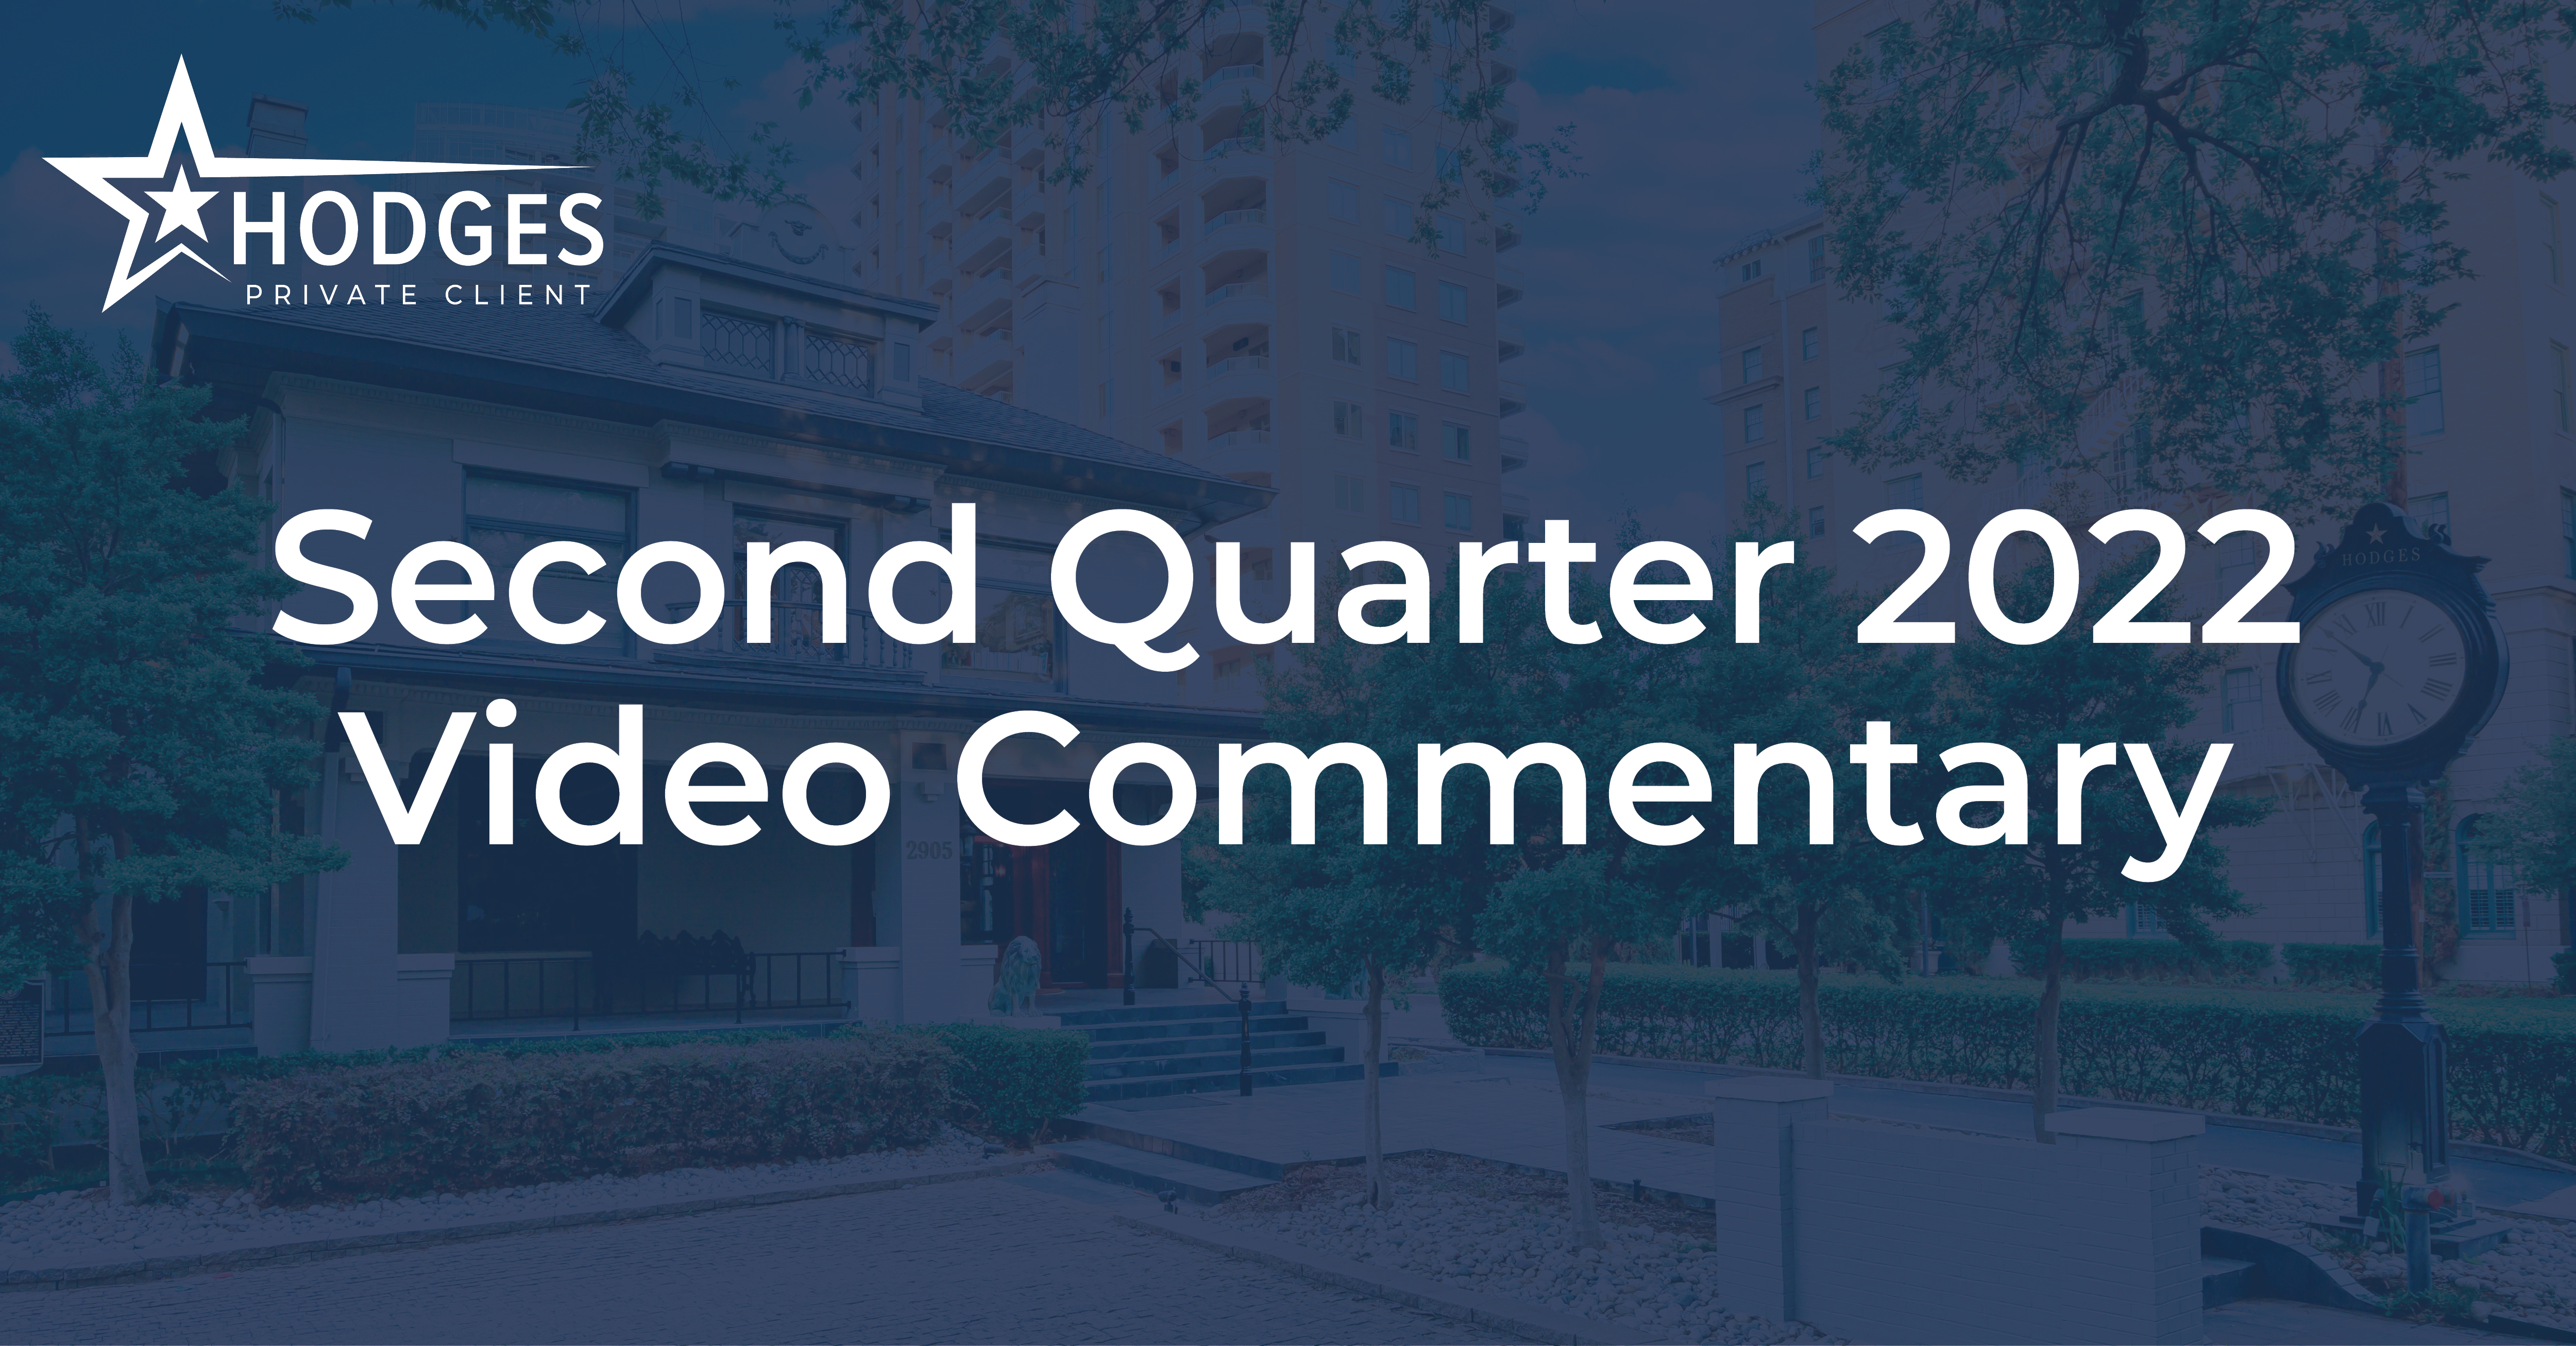 Second Quarter 2022 Video Commentary